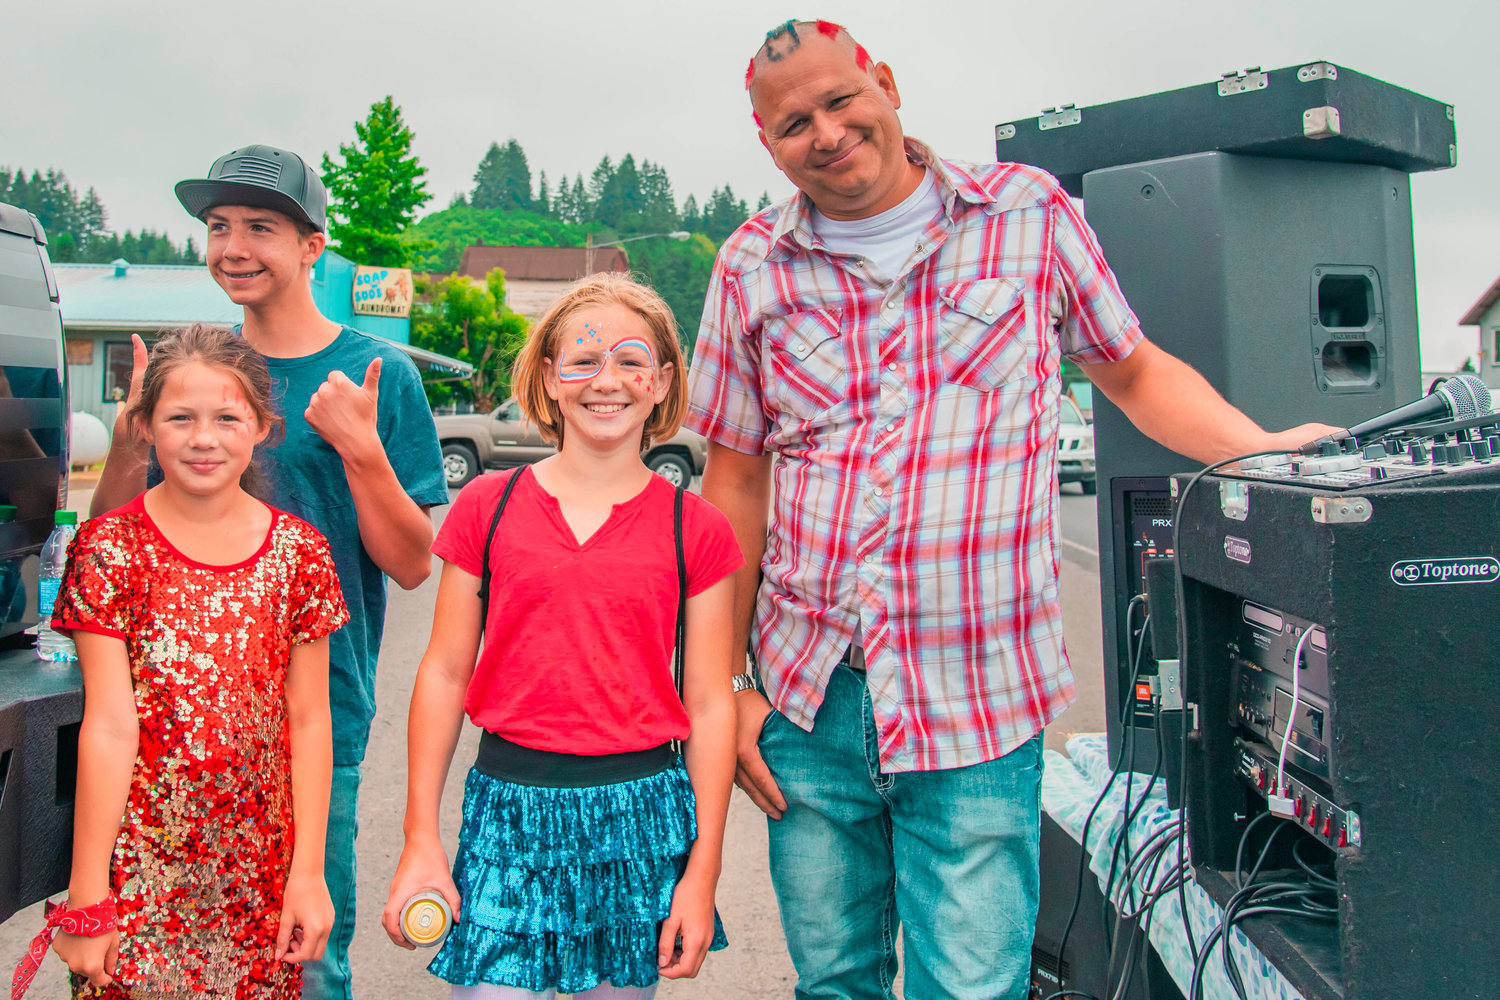 DJ Spider Mann and kids pose for a photo following the Freedom Festival parade on Saturday along East State Street in downtown Mossyrock.